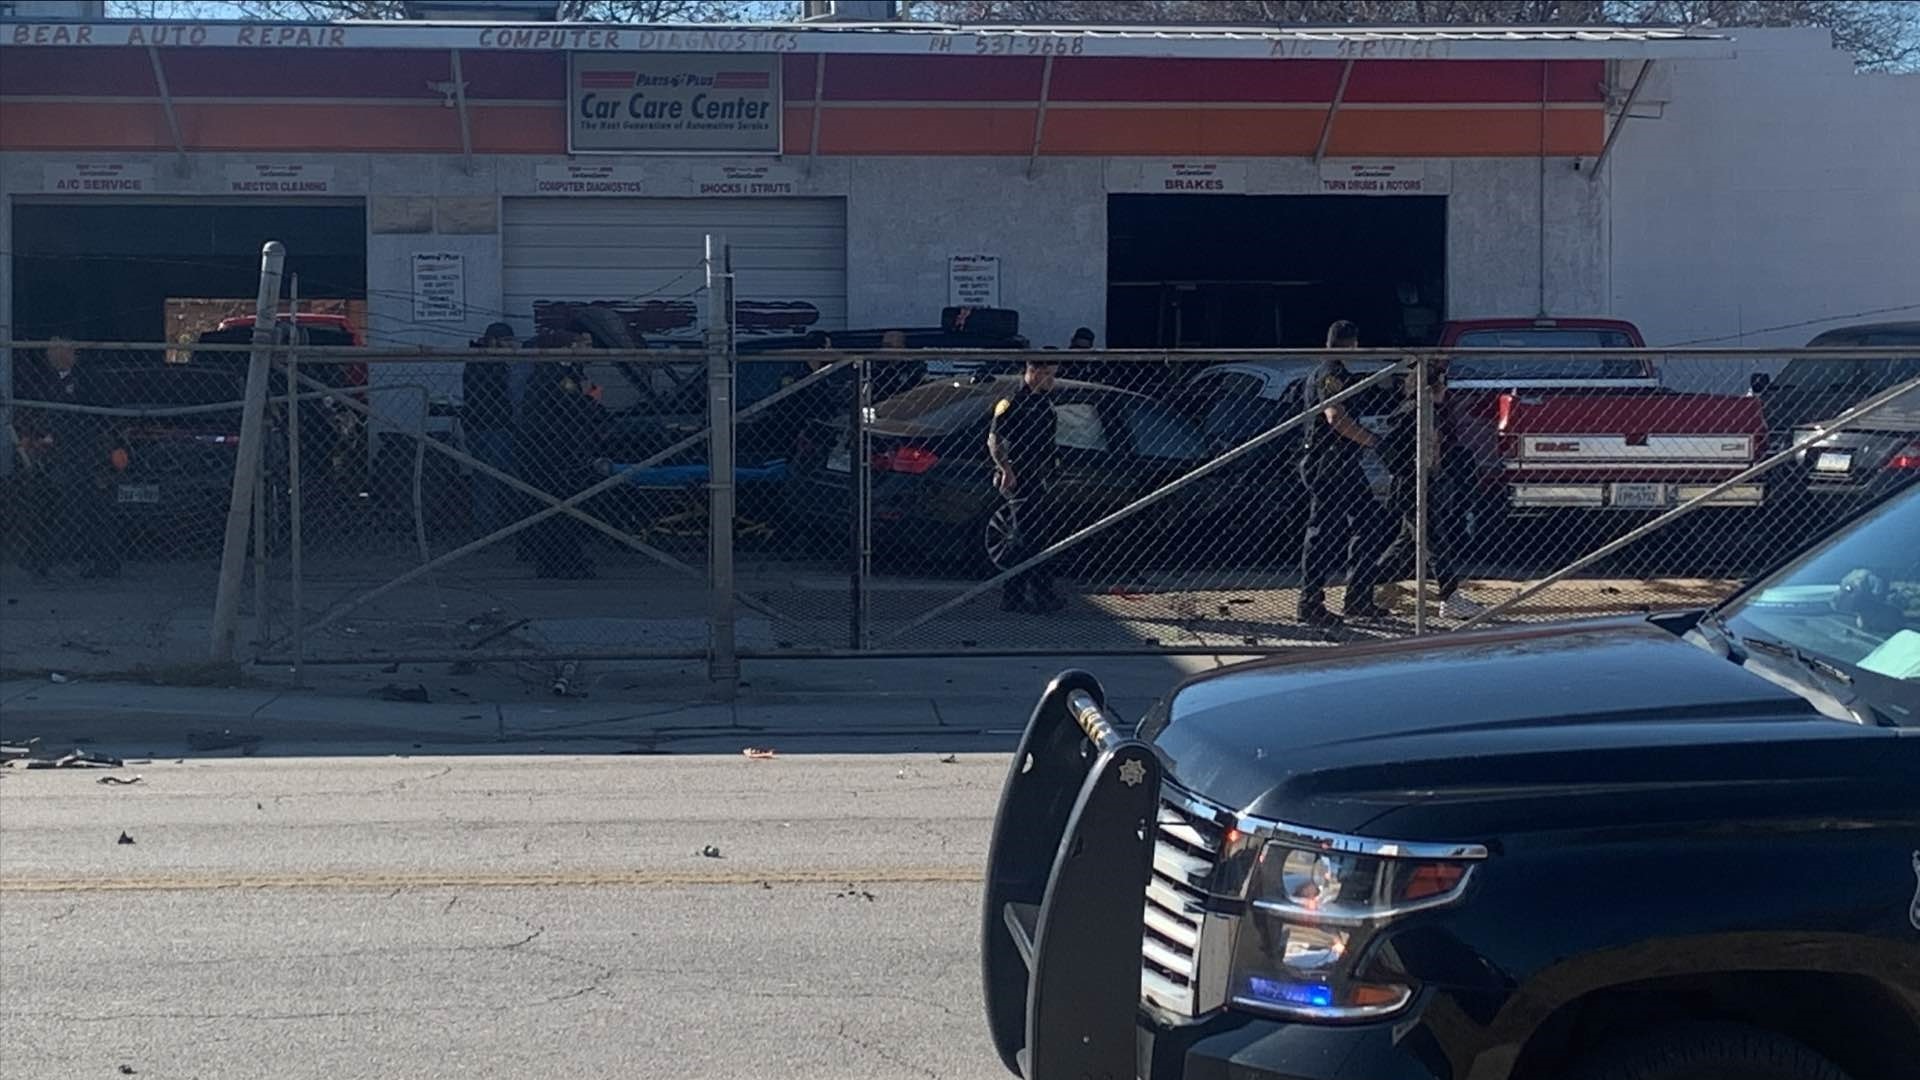 San Antonio authorities said the young driver crashed into a car on the road before jumping a curb, crashing through a fence, and trapping a man under a vehicle.